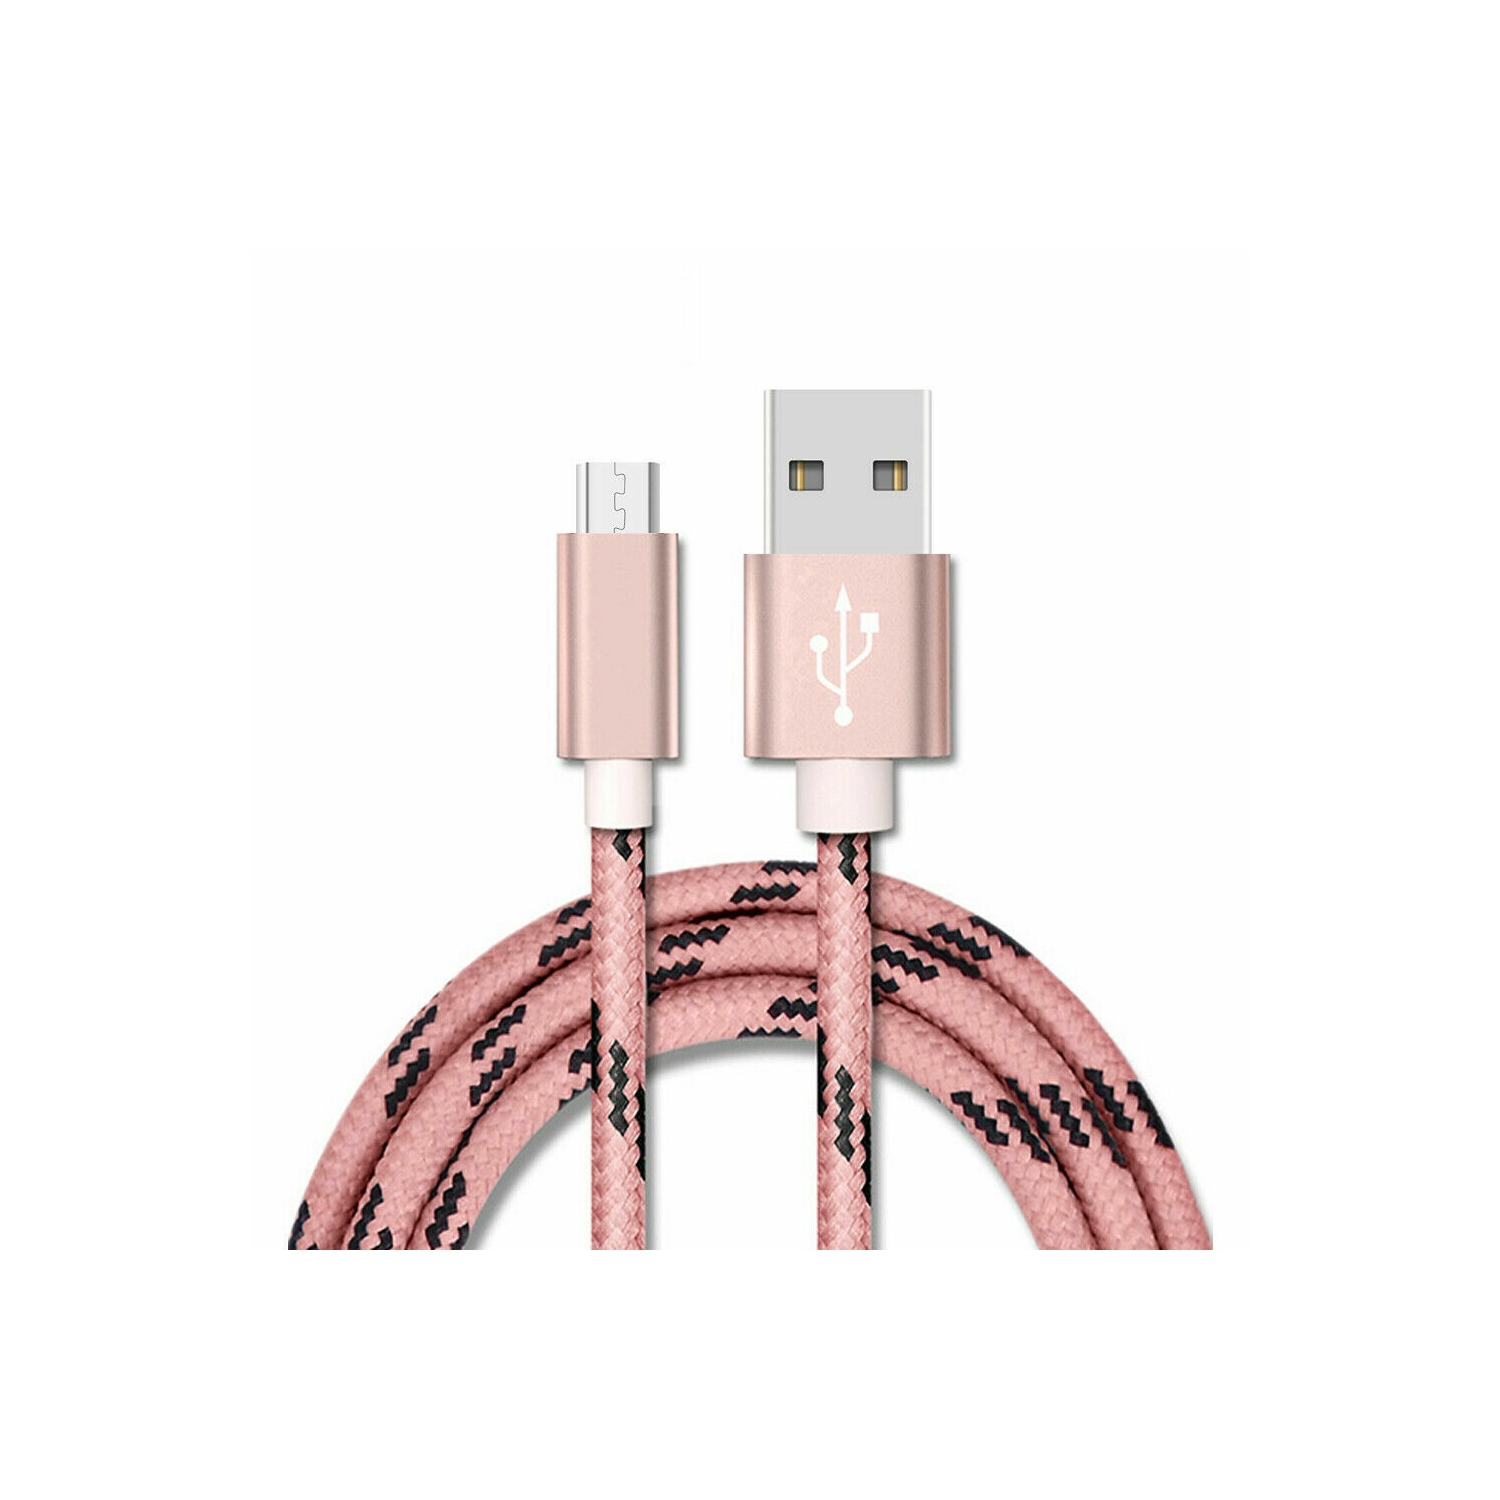 [2Pack] USB Type C Cable, Fast Charging /Sync Data Cable Cord, Samsung Galaxy S23 S22 S21 S10 S9 S8 S20 Plus Note Ultra A22 A42 A52 A72 A73 A71 Braided Long Cable (1 Meter)